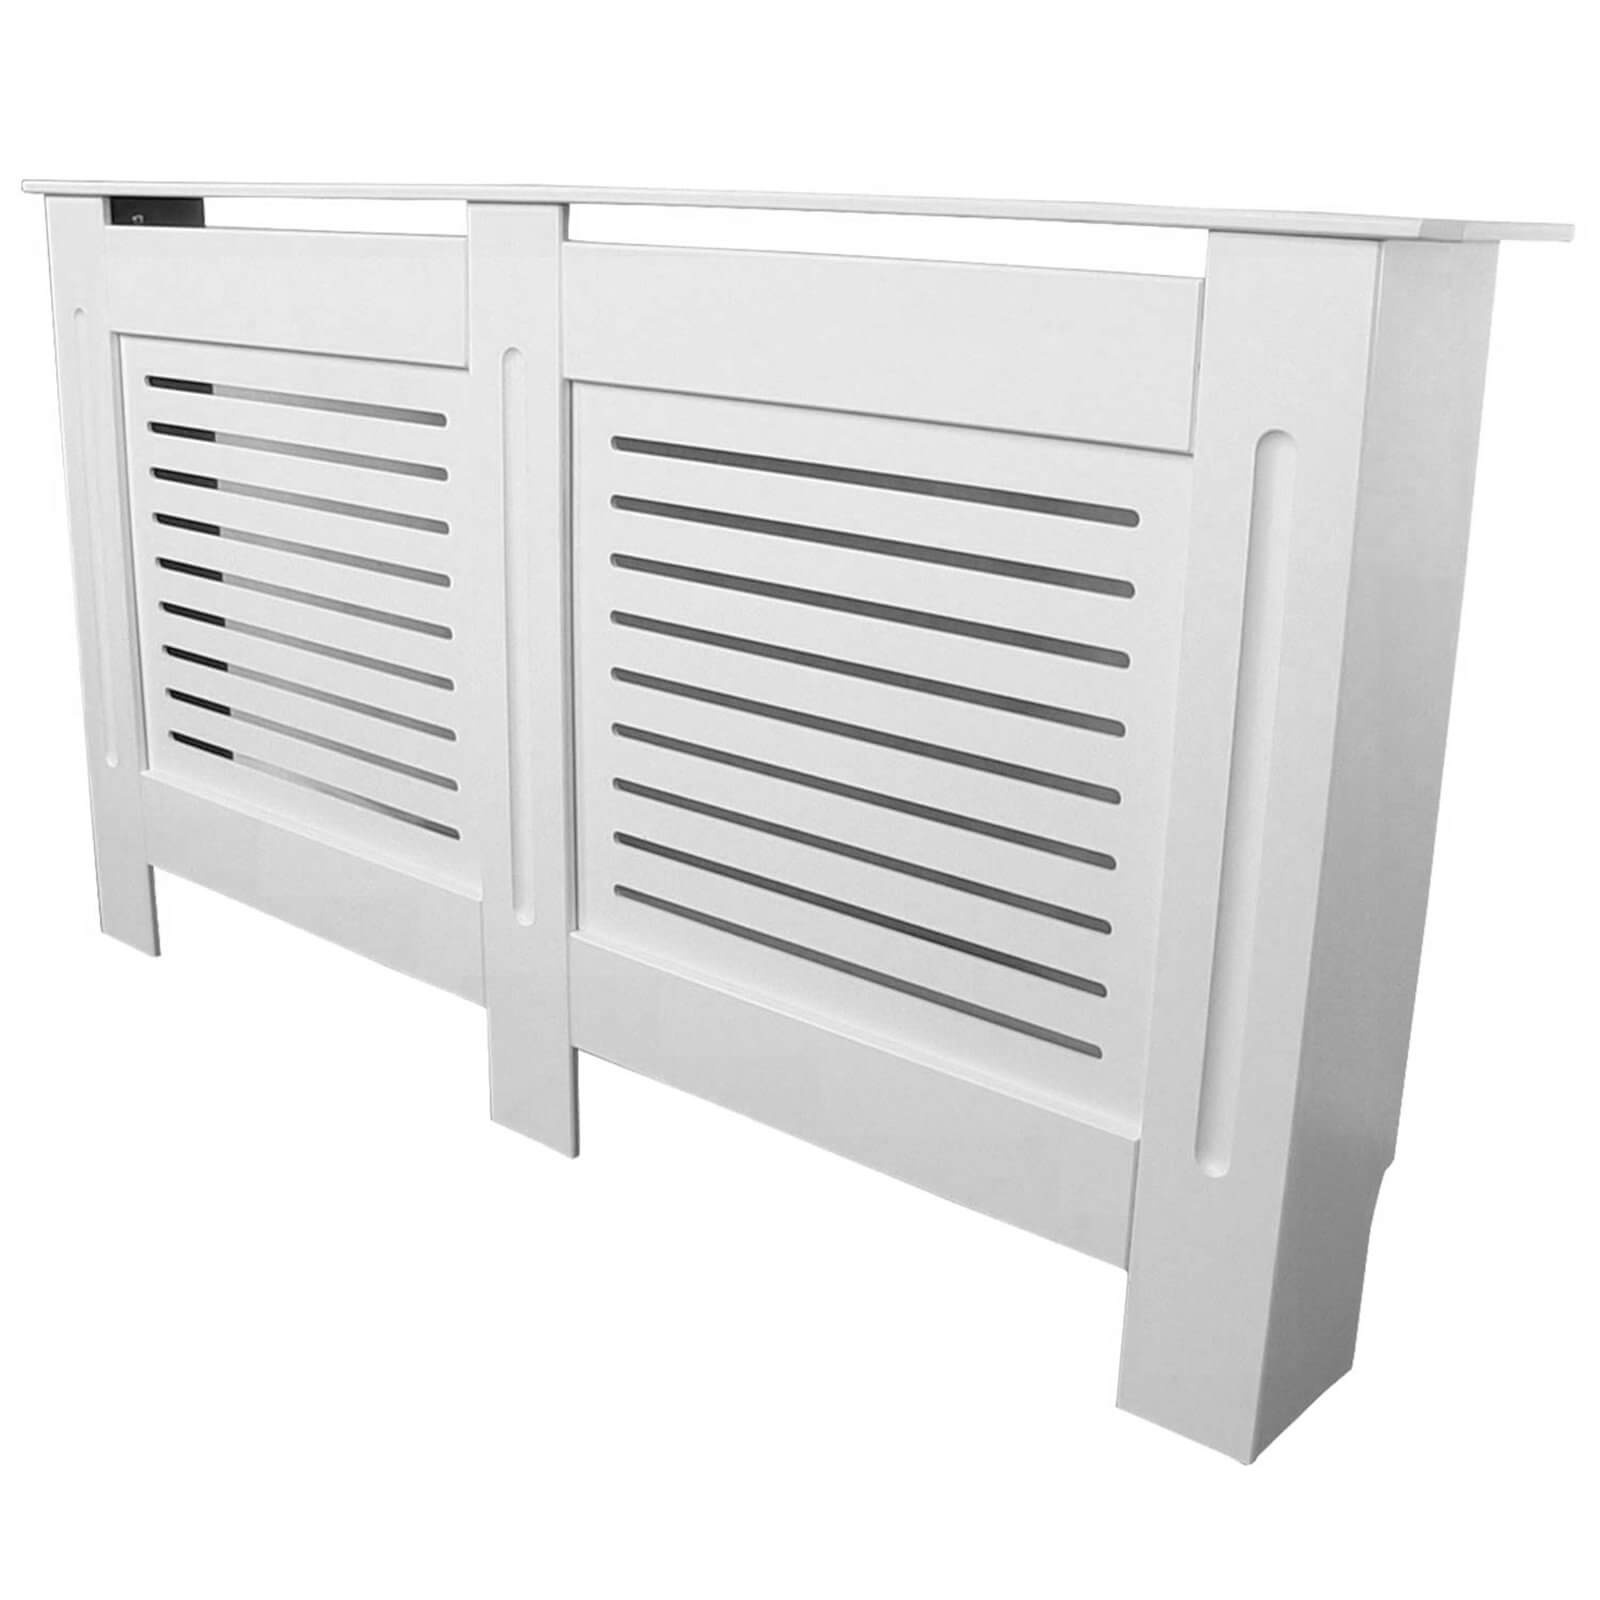 Radiator Cover with Horizontal Slatted Design in White - Extra Large